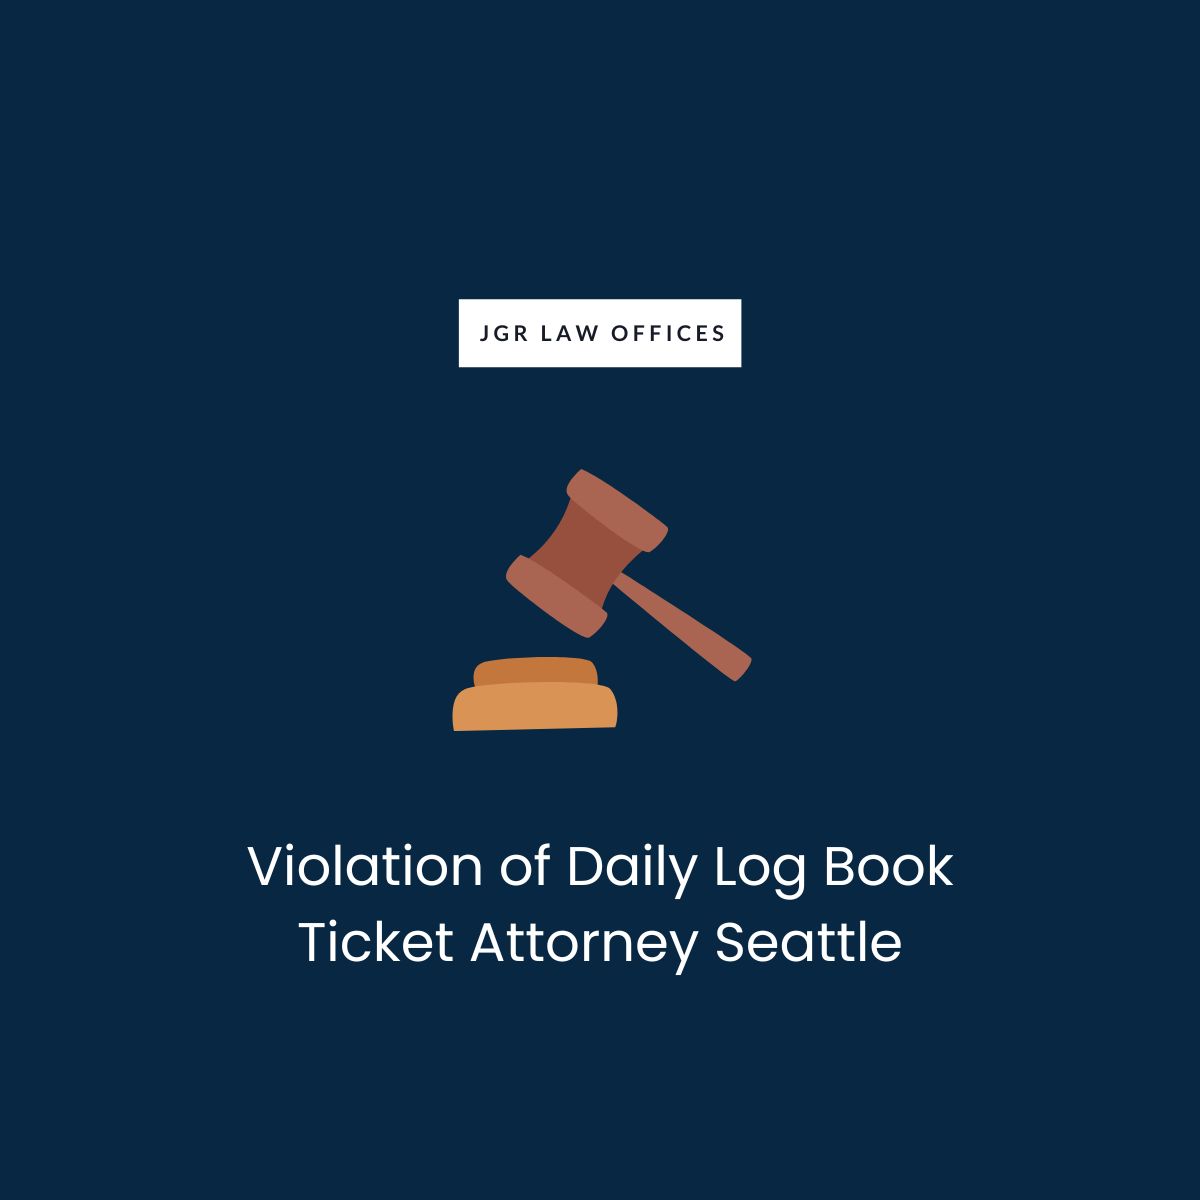 Violation of Daily Log Book Ticket Attorney Seattle